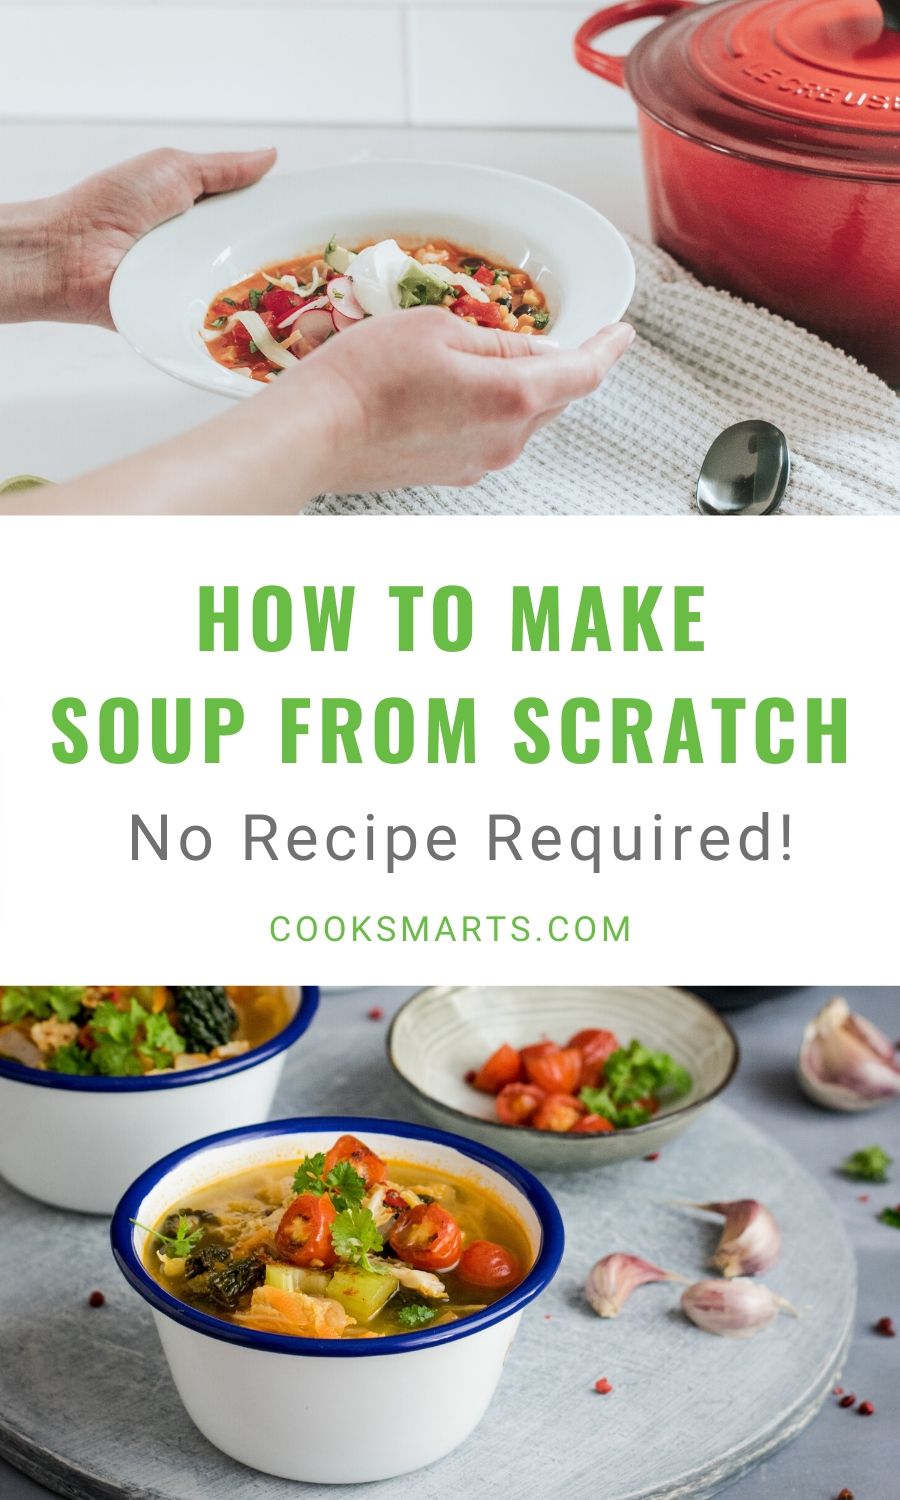 How to Make Soup | Cook Smarts